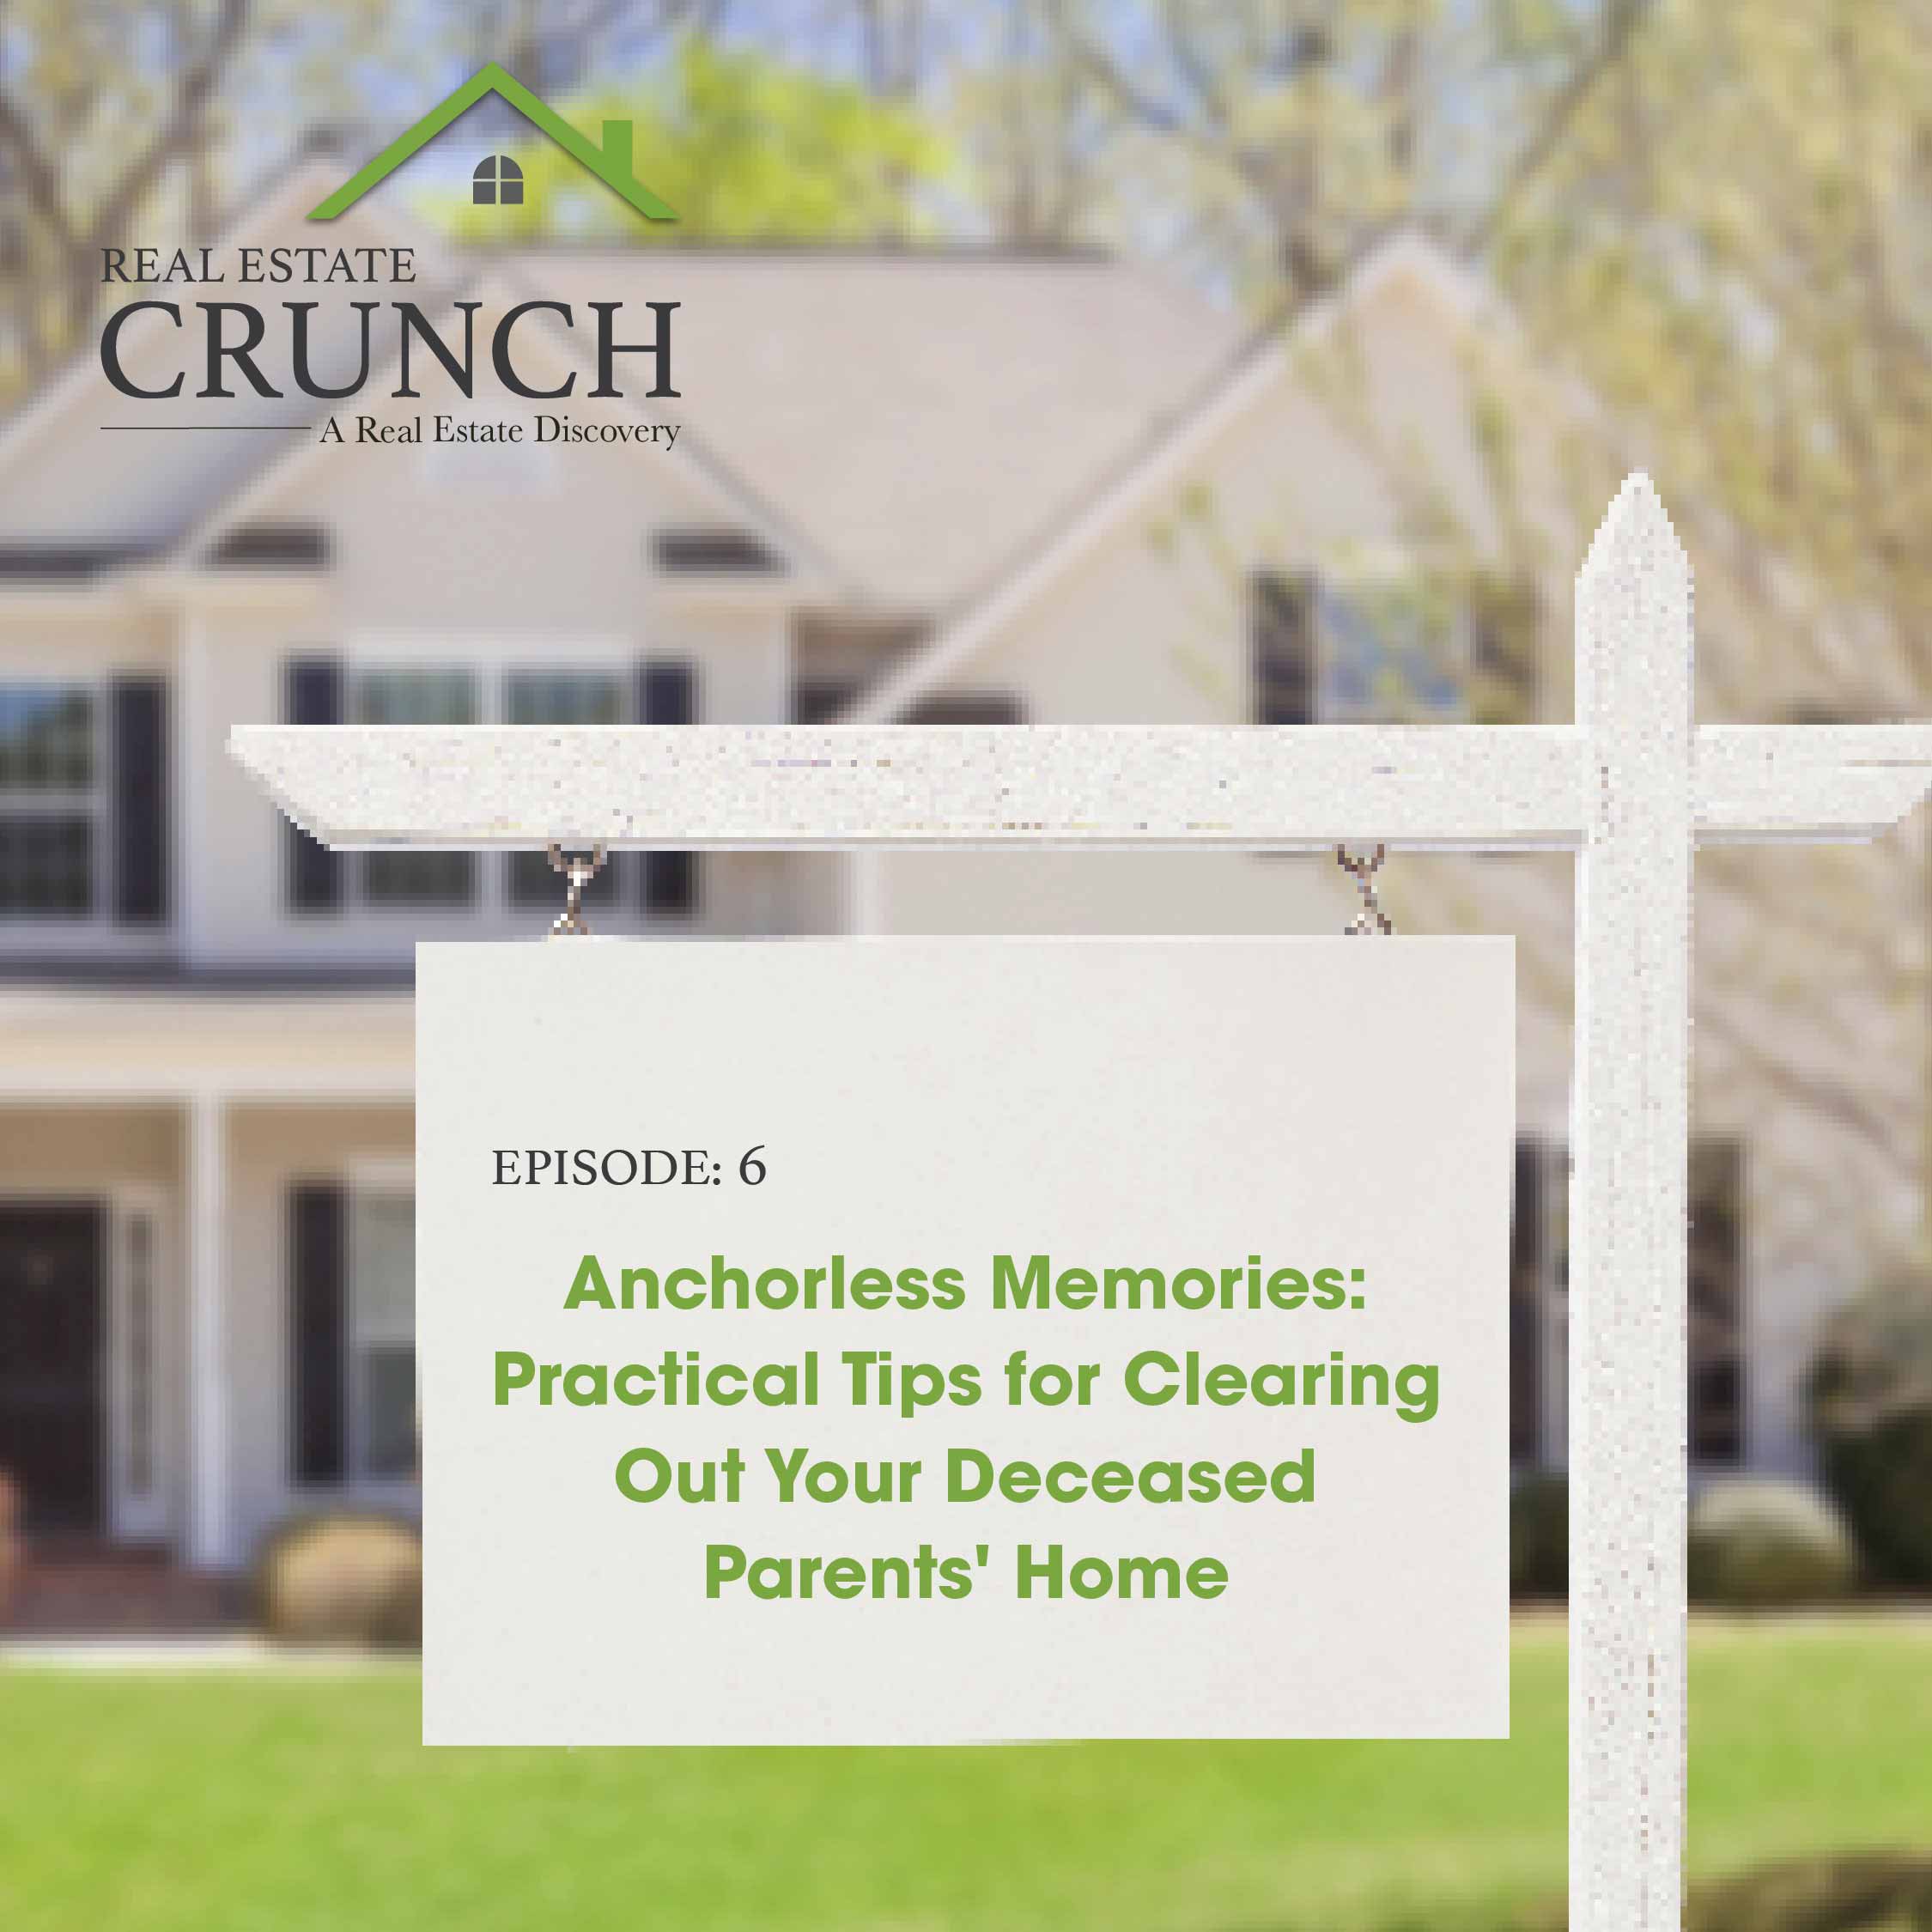 Anchorless Memories: Practical Tips for Clearing Out Your Deceased Parents' Hom